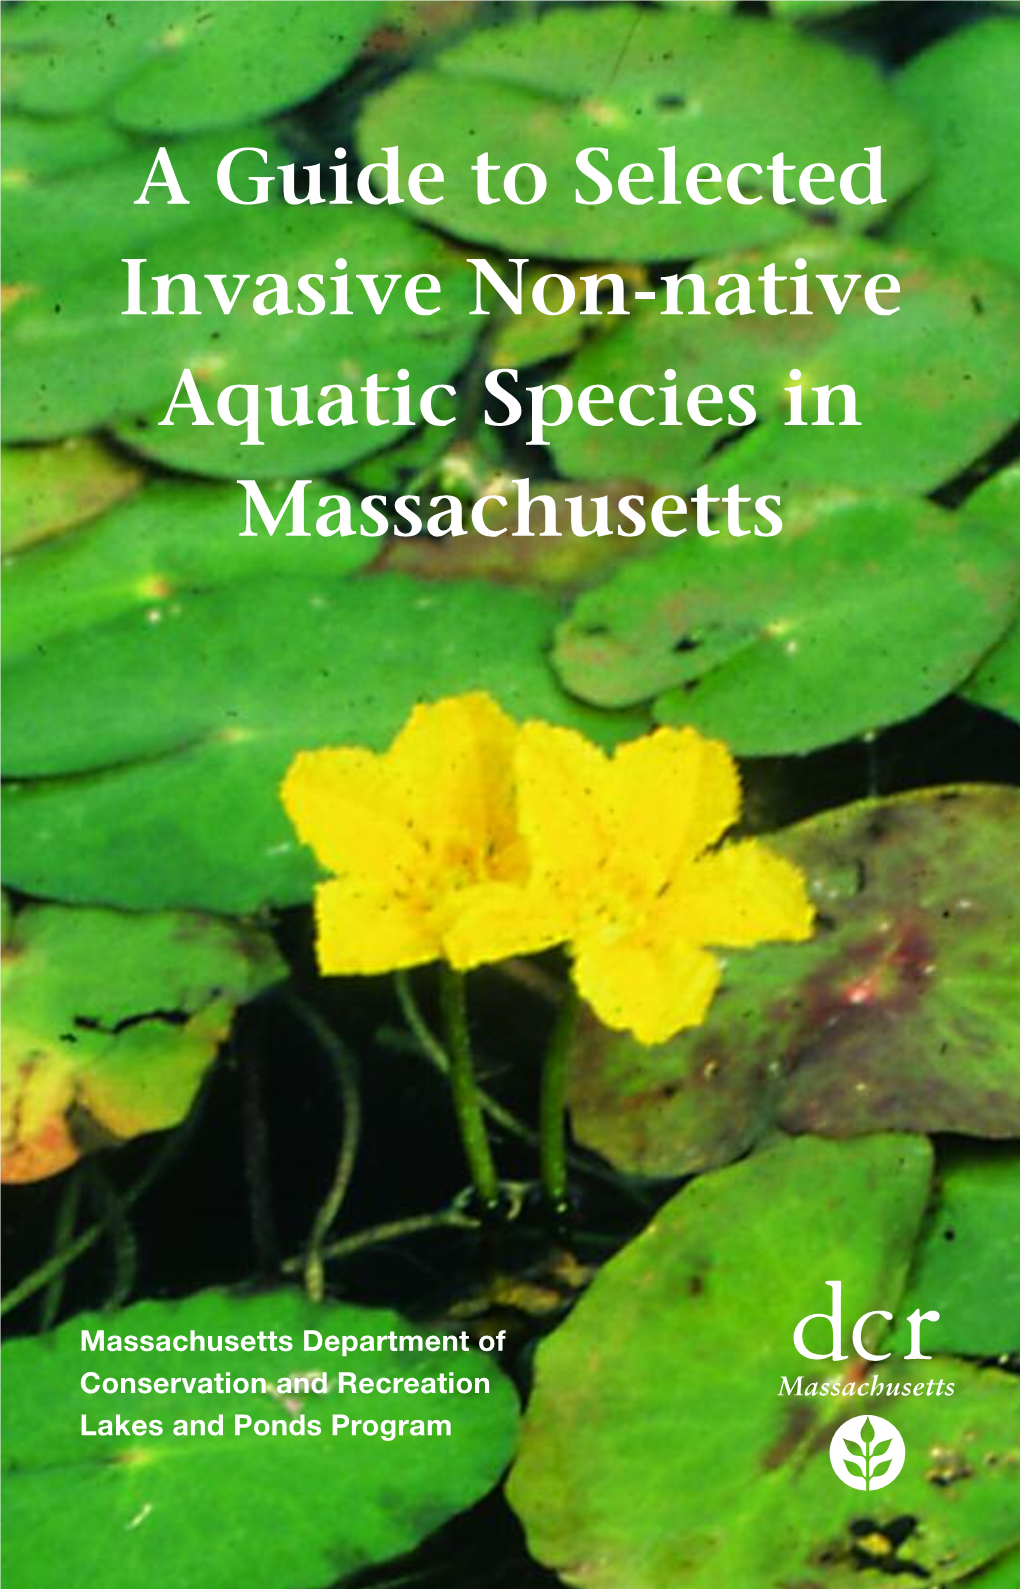 A Guide to Selected Invasive Non-Native Aquatic Species in Massachusetts